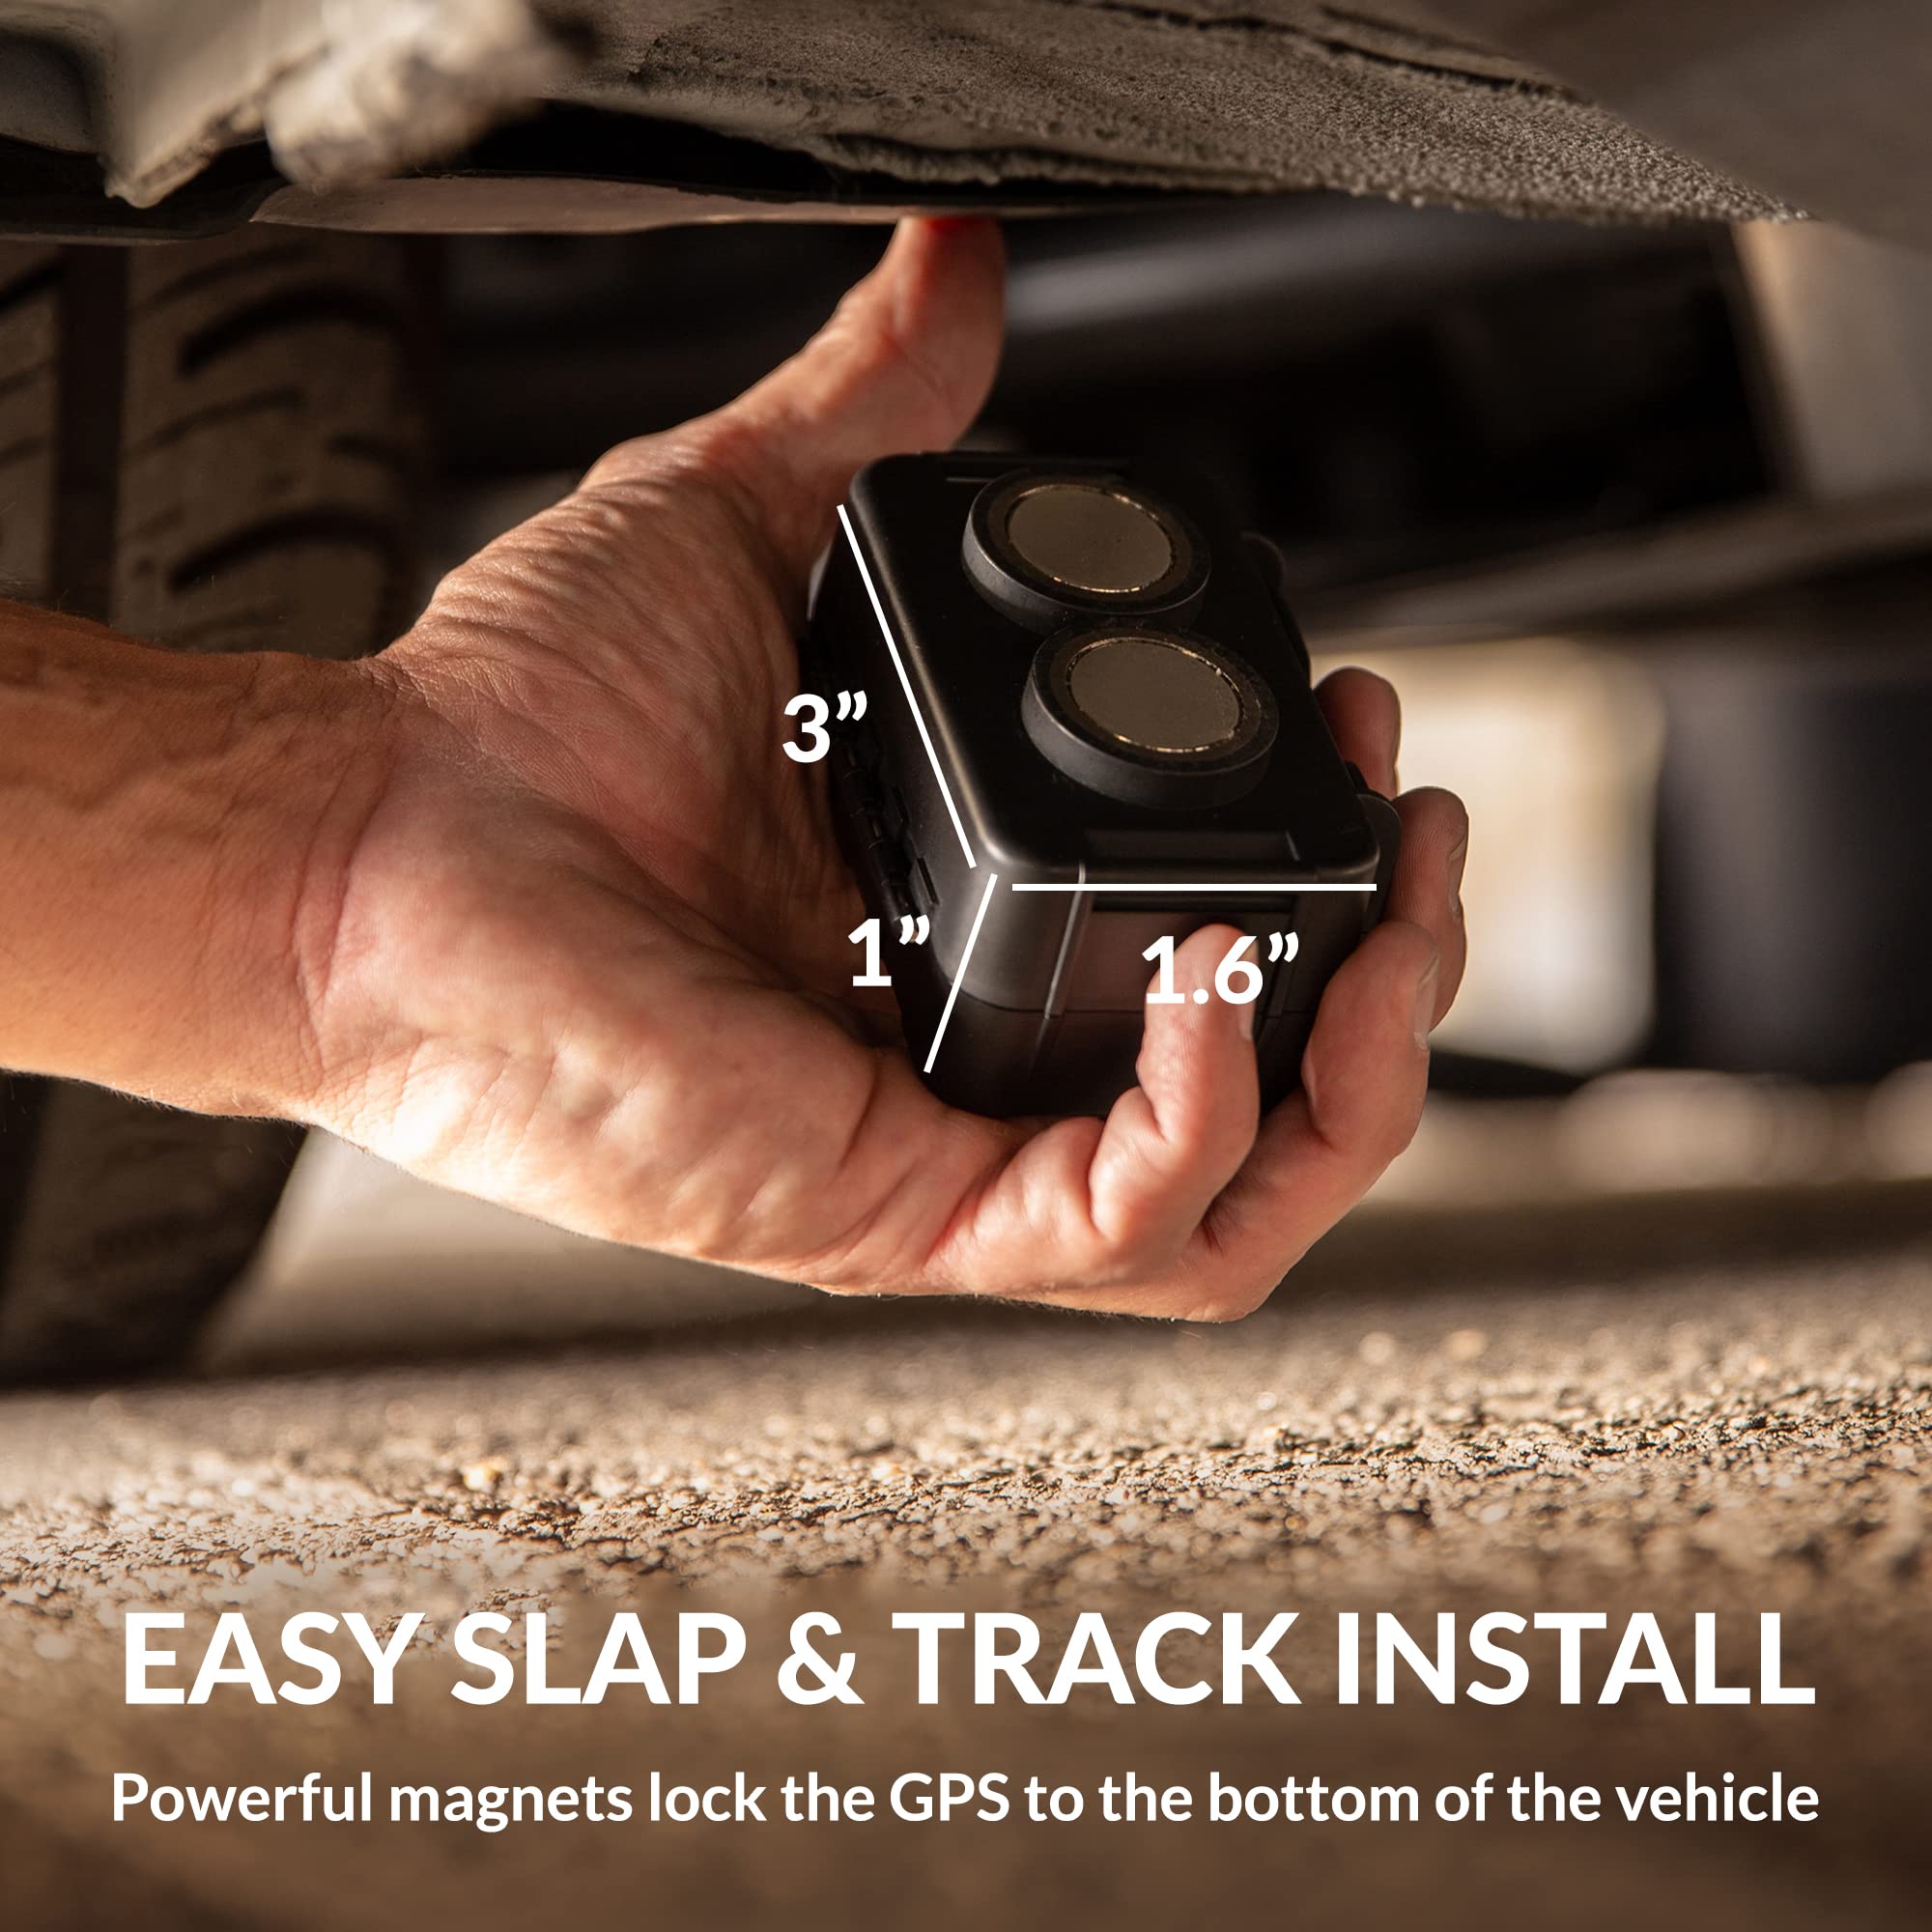 Lightning GPS GL300 GPS Tracker for Vehicles with Magnetic Case - Subscription Required Car Tracker Device for Vehicles - Fleet GPS Tracker Automotive Tracking Device - Cars Hidden GPS Tracking Device